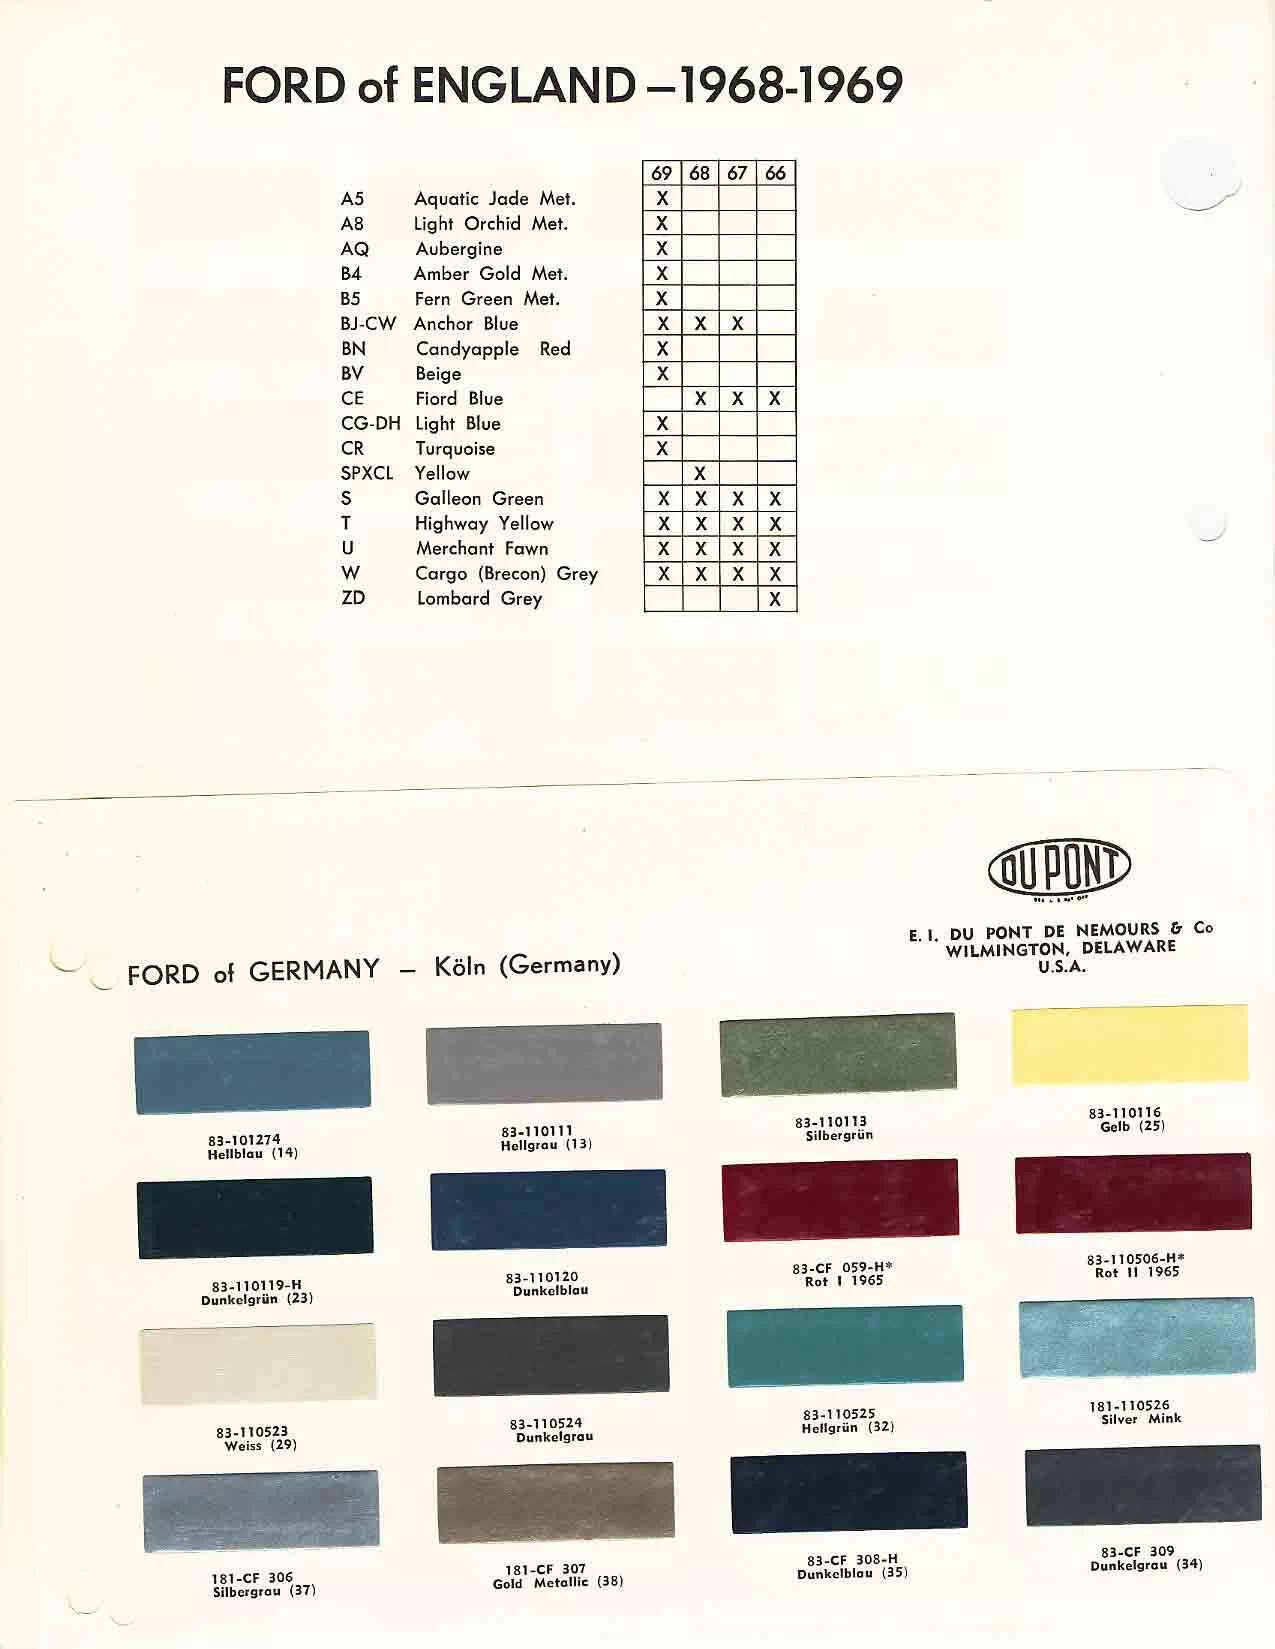 Color examples, Ordering Codes, OEM Paint Code, Color Swatches, and Color Names for the Ford Motor Company in 1967